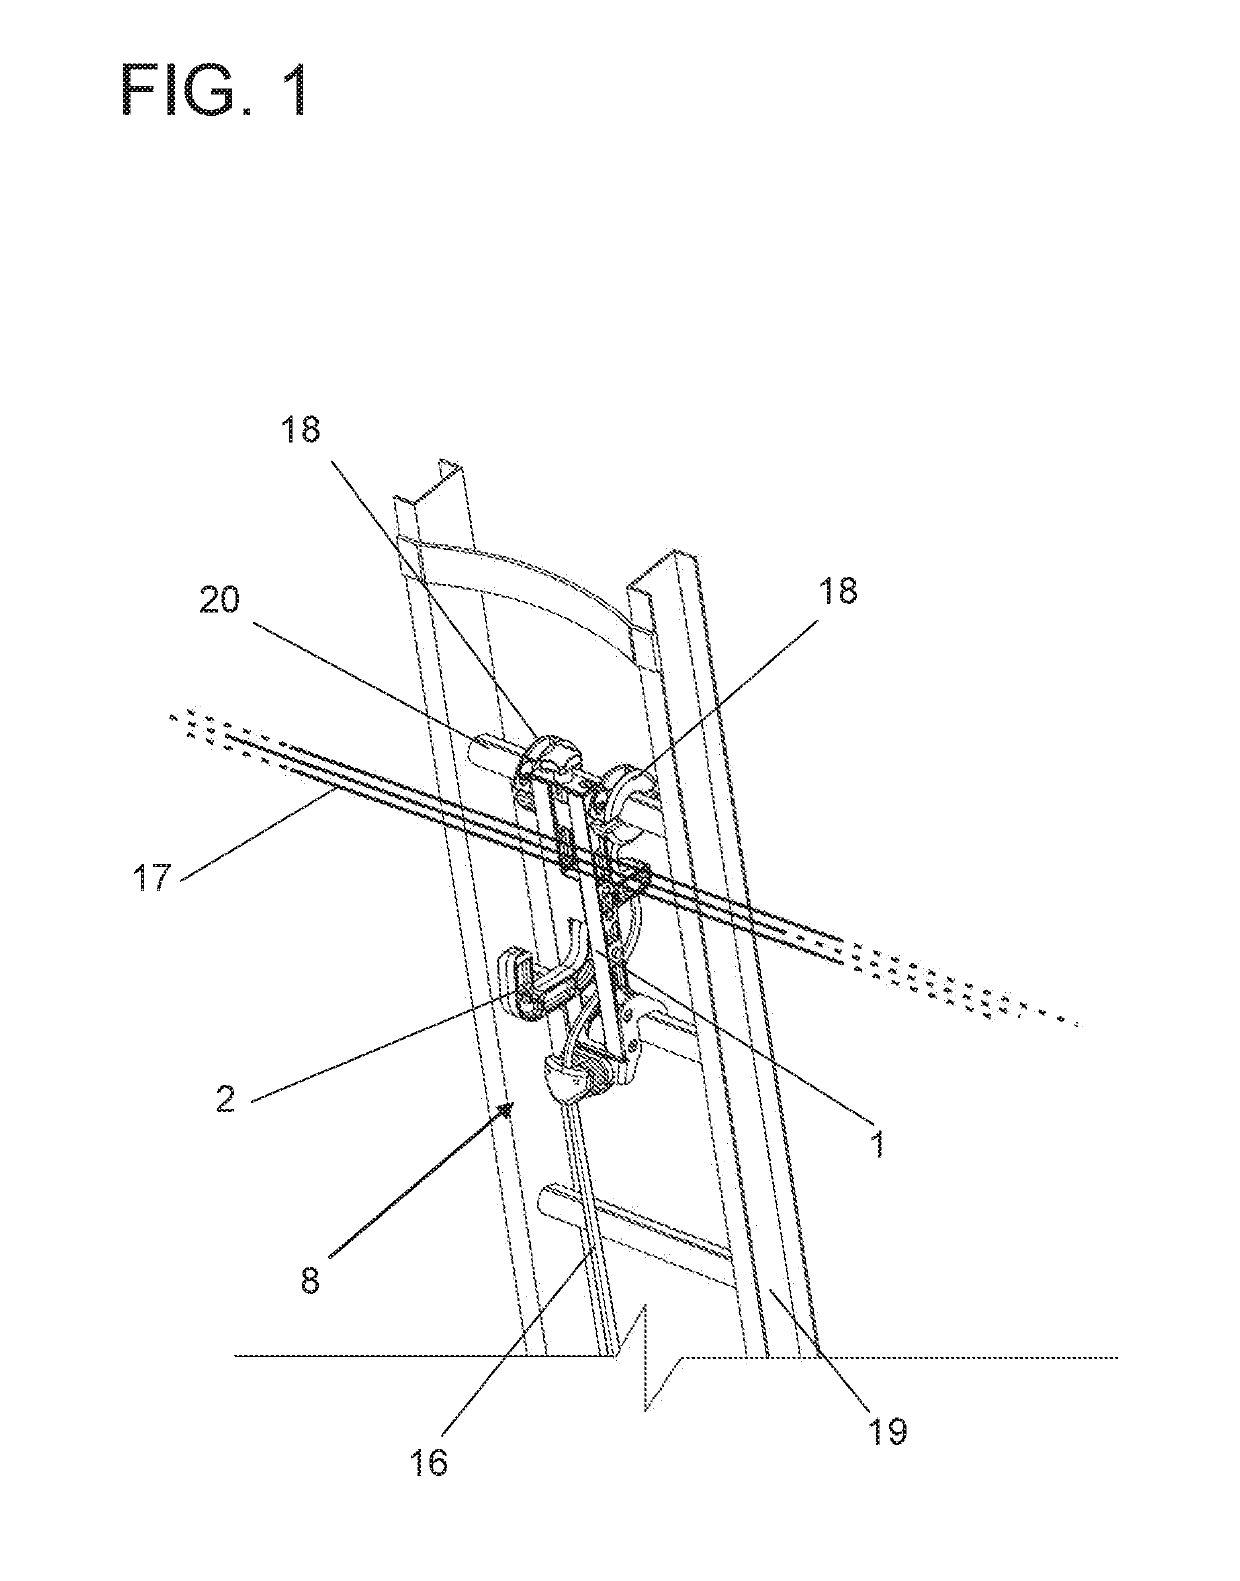 Arrangement introduced in a device having a hook for anchoring a ladder to cables